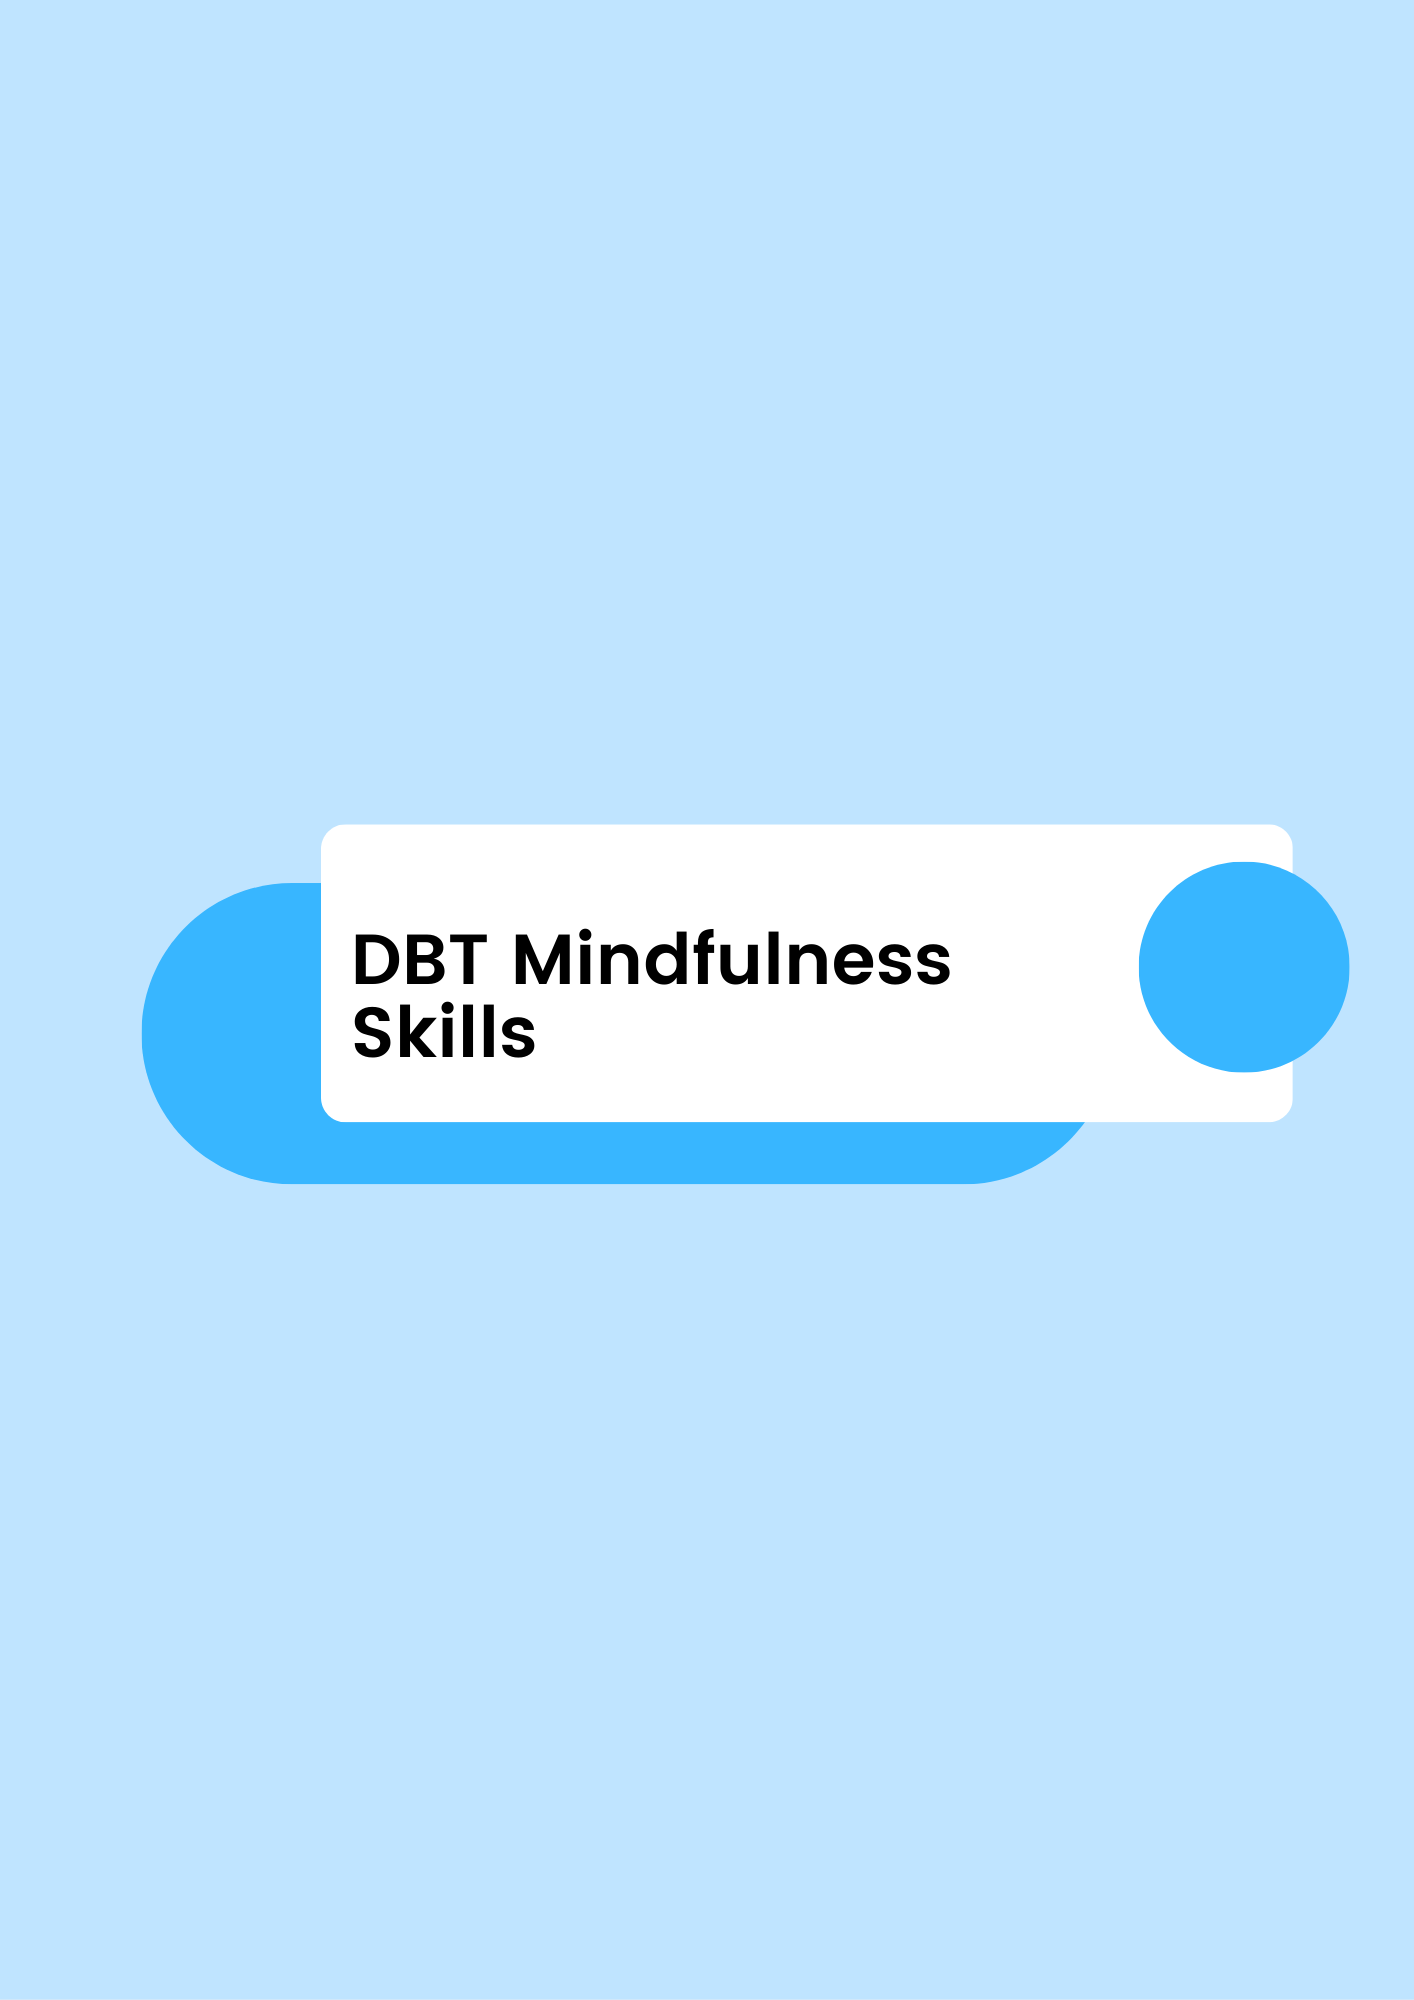 Little Guide To DBT Mindfulness Skills: E-Book & Journal Prompts